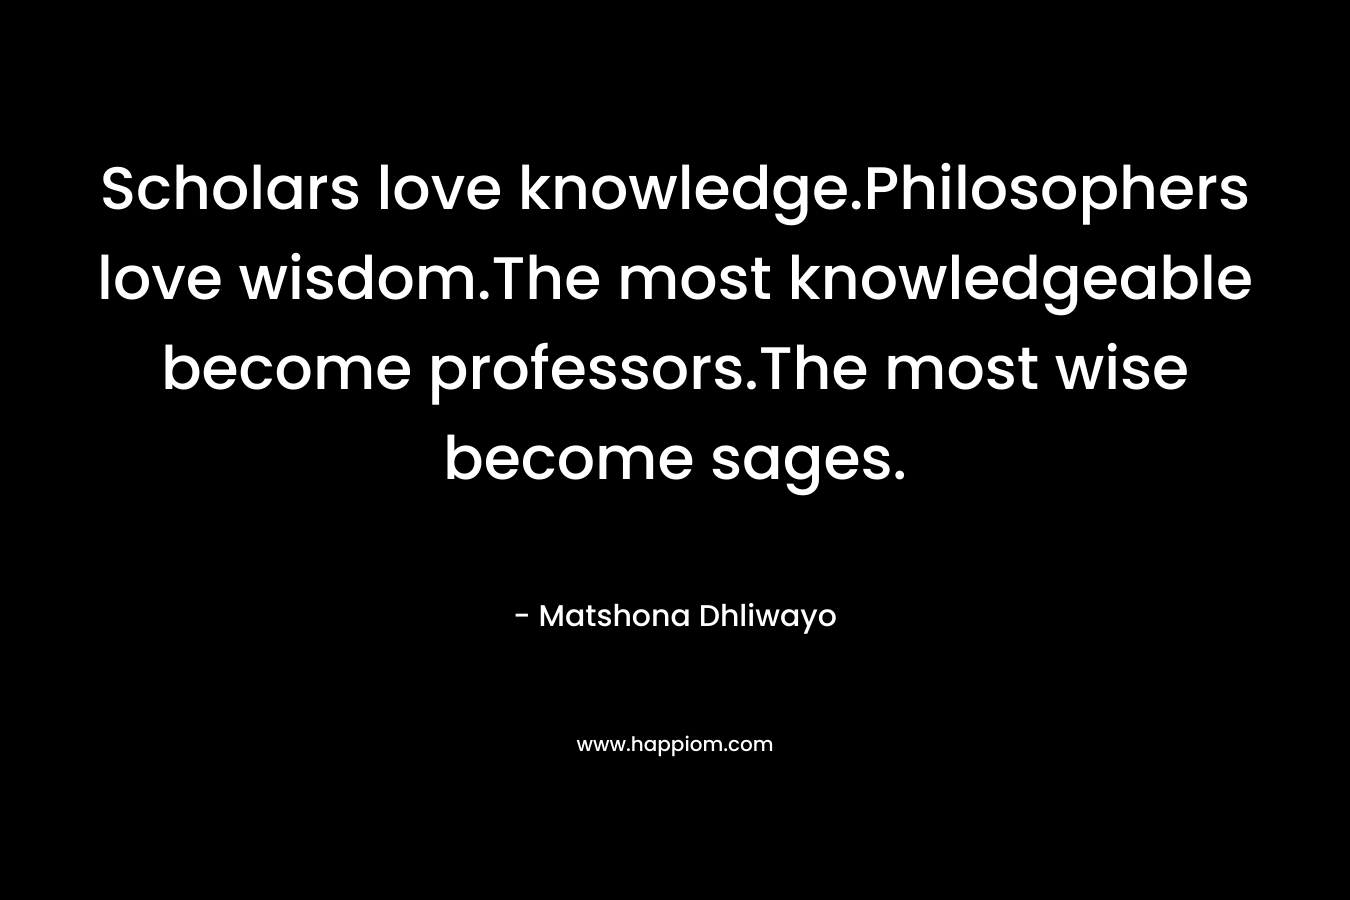 Scholars love knowledge.Philosophers love wisdom.The most knowledgeable become professors.The most wise become sages.